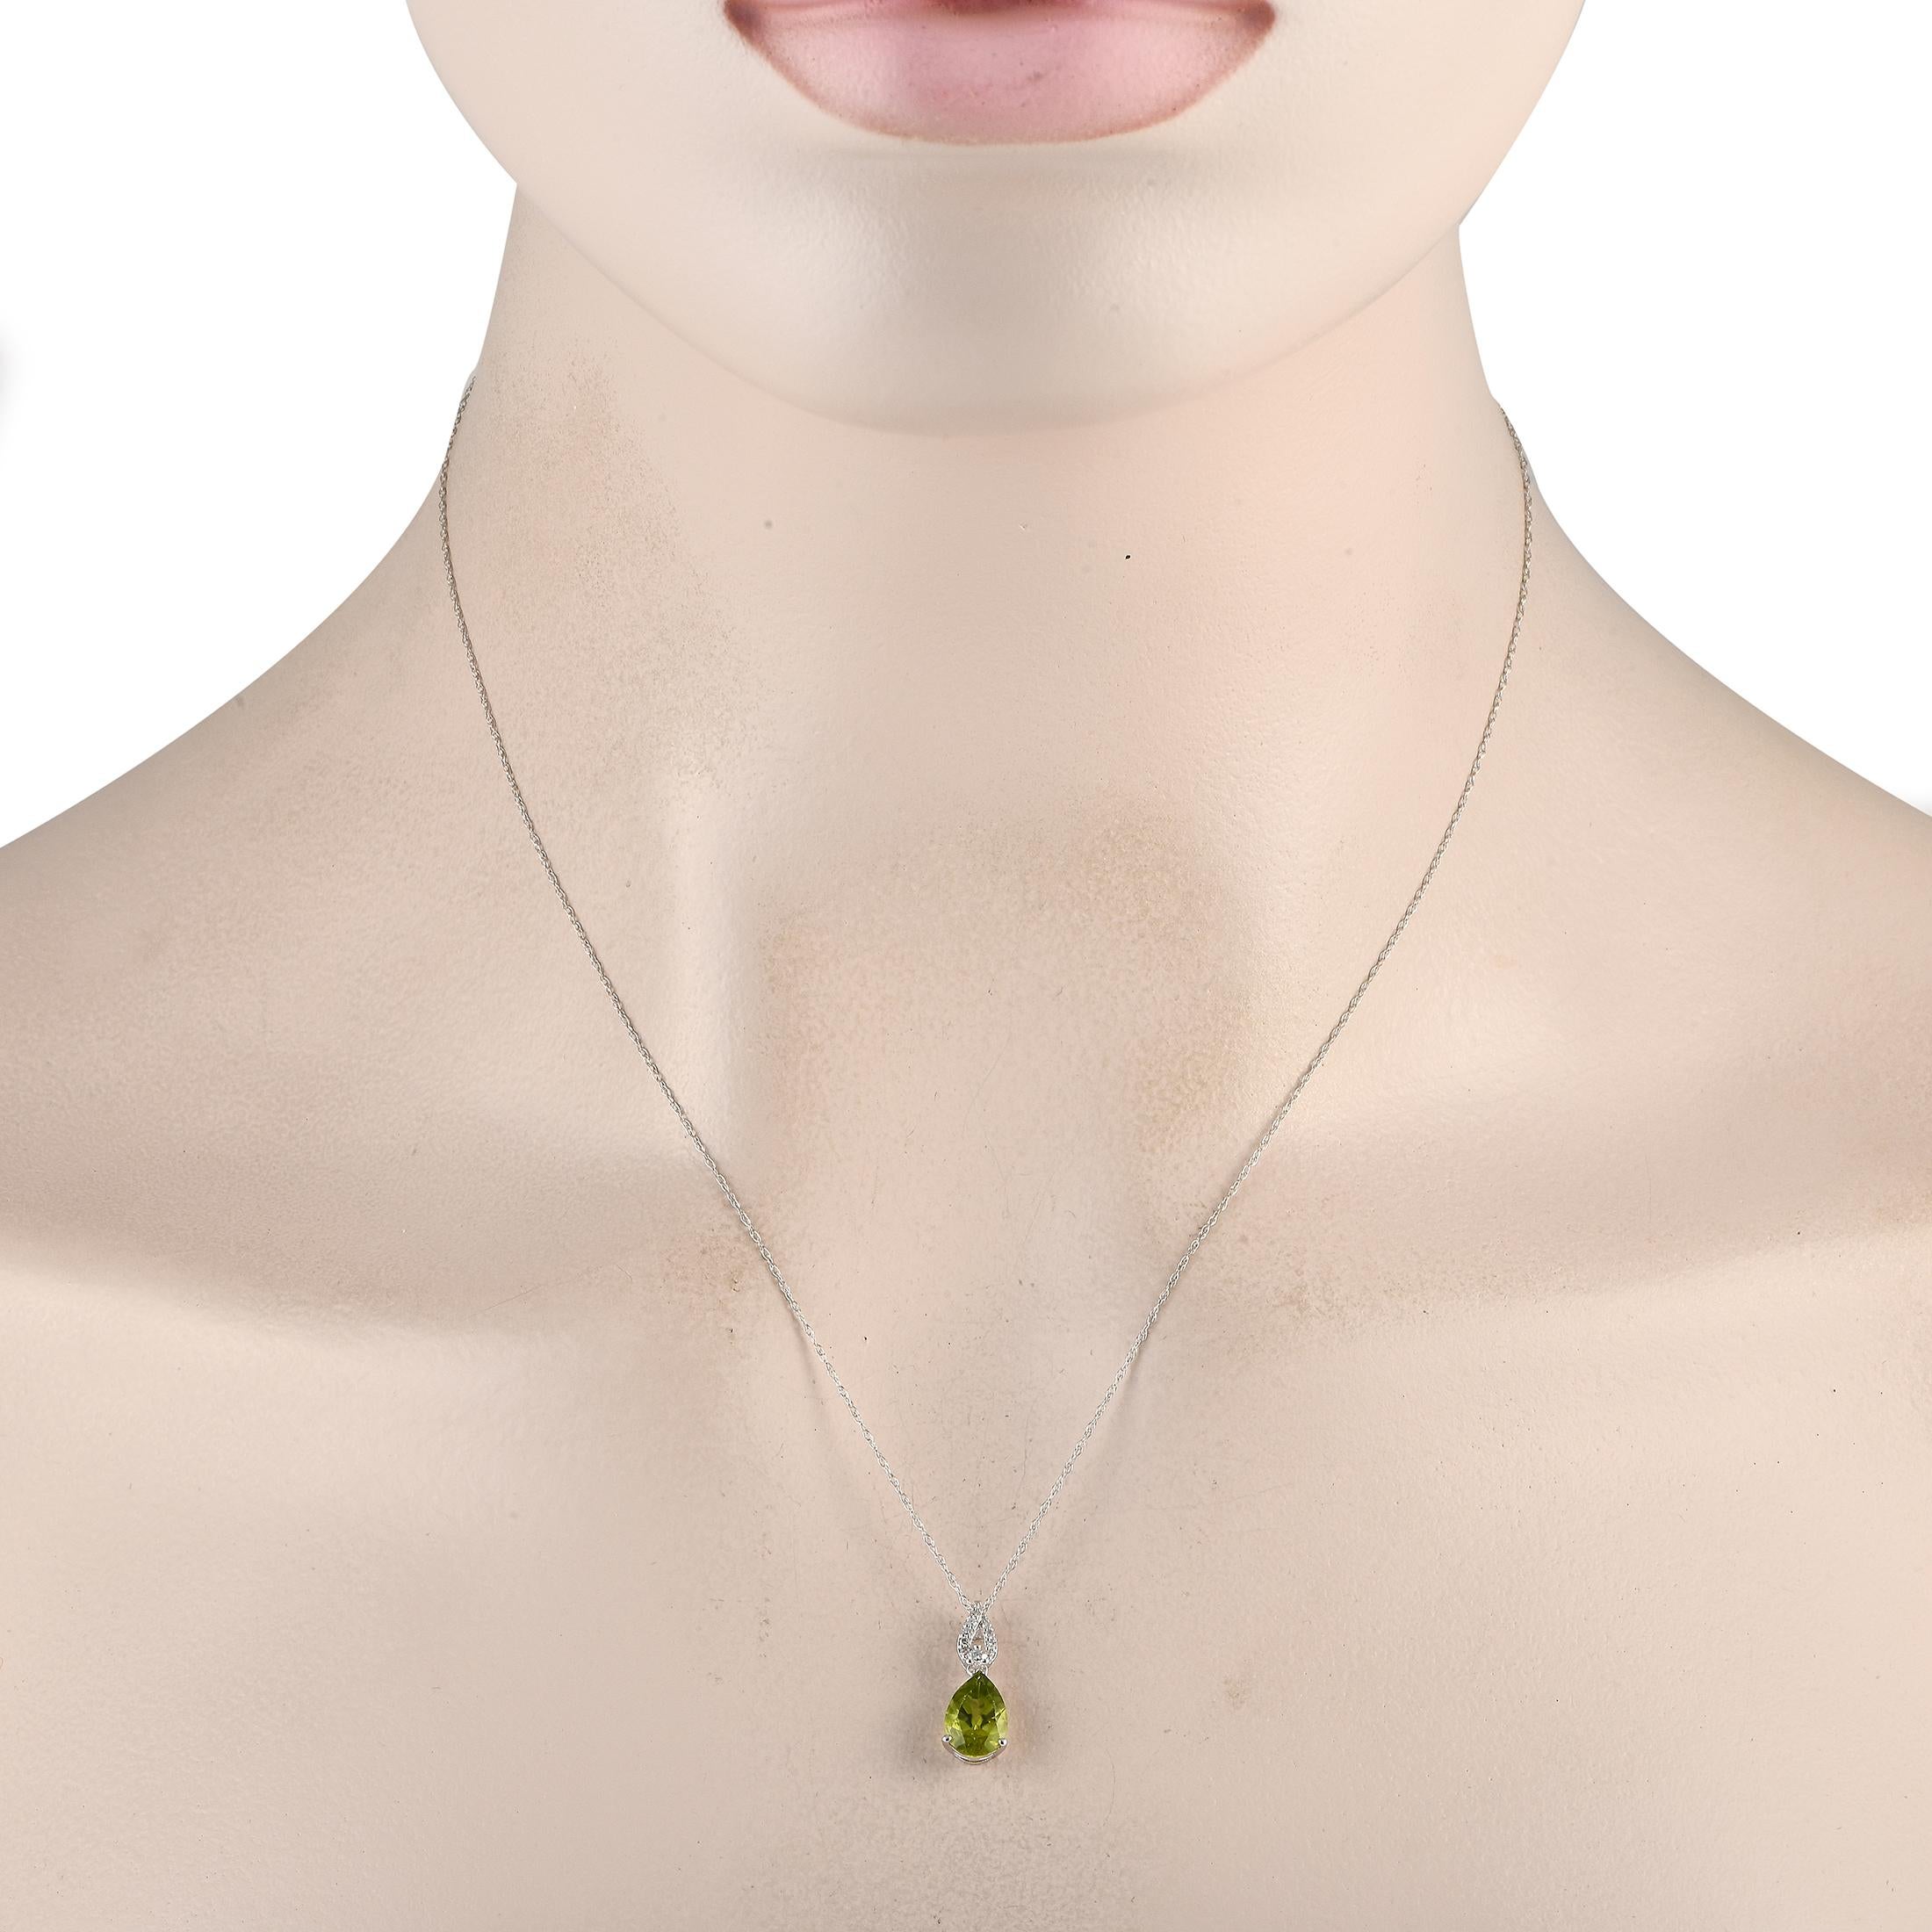 You can't go wrong with gold and diamonds with a hint of color. This LB Exclusive piece features a delicate chain necklace measuring 18 inches long. Its link-style bail is traced with diamonds and it holds a bright and beautiful pear-cut peridot.